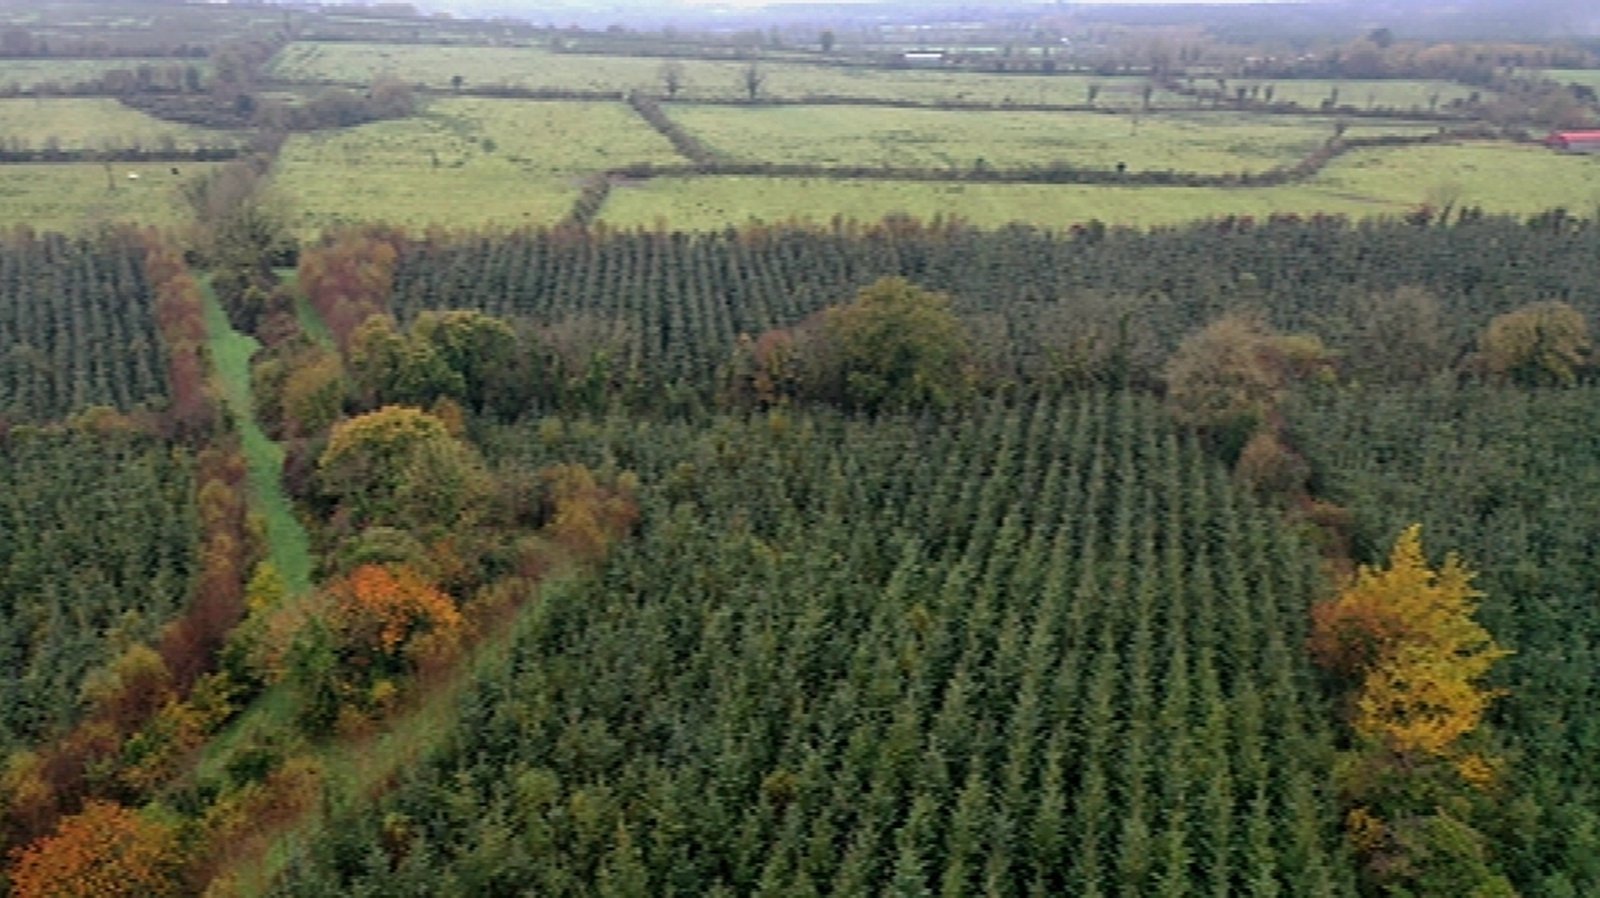 What's the impact of large-scale forestry on Irish communities?